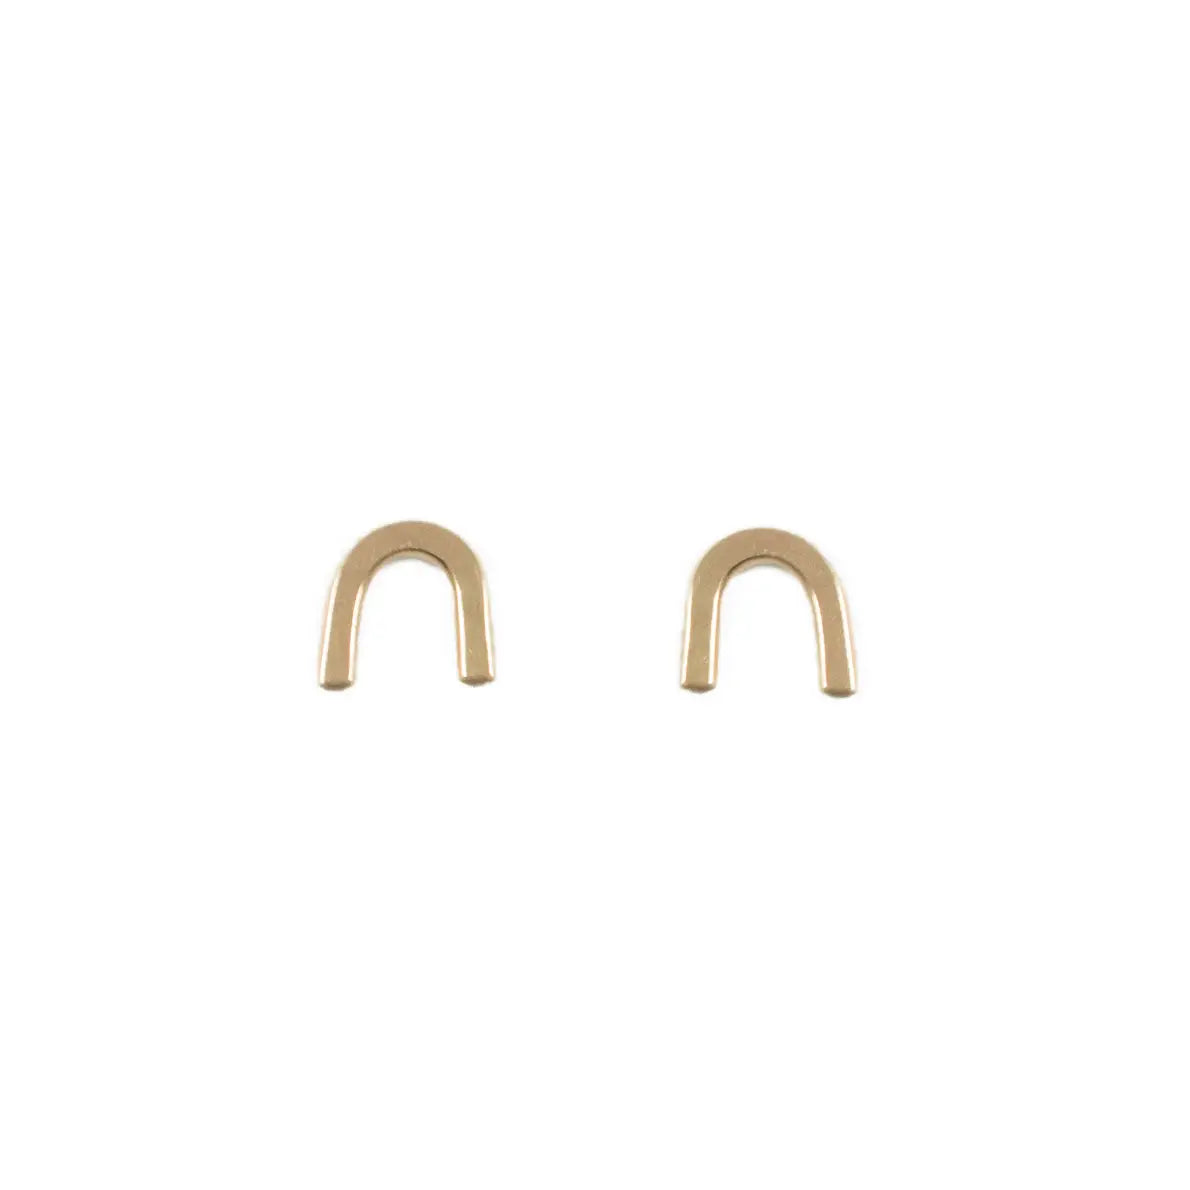 The 14KT Gold Filled Arch Stud Earrings by The Land Of Salt